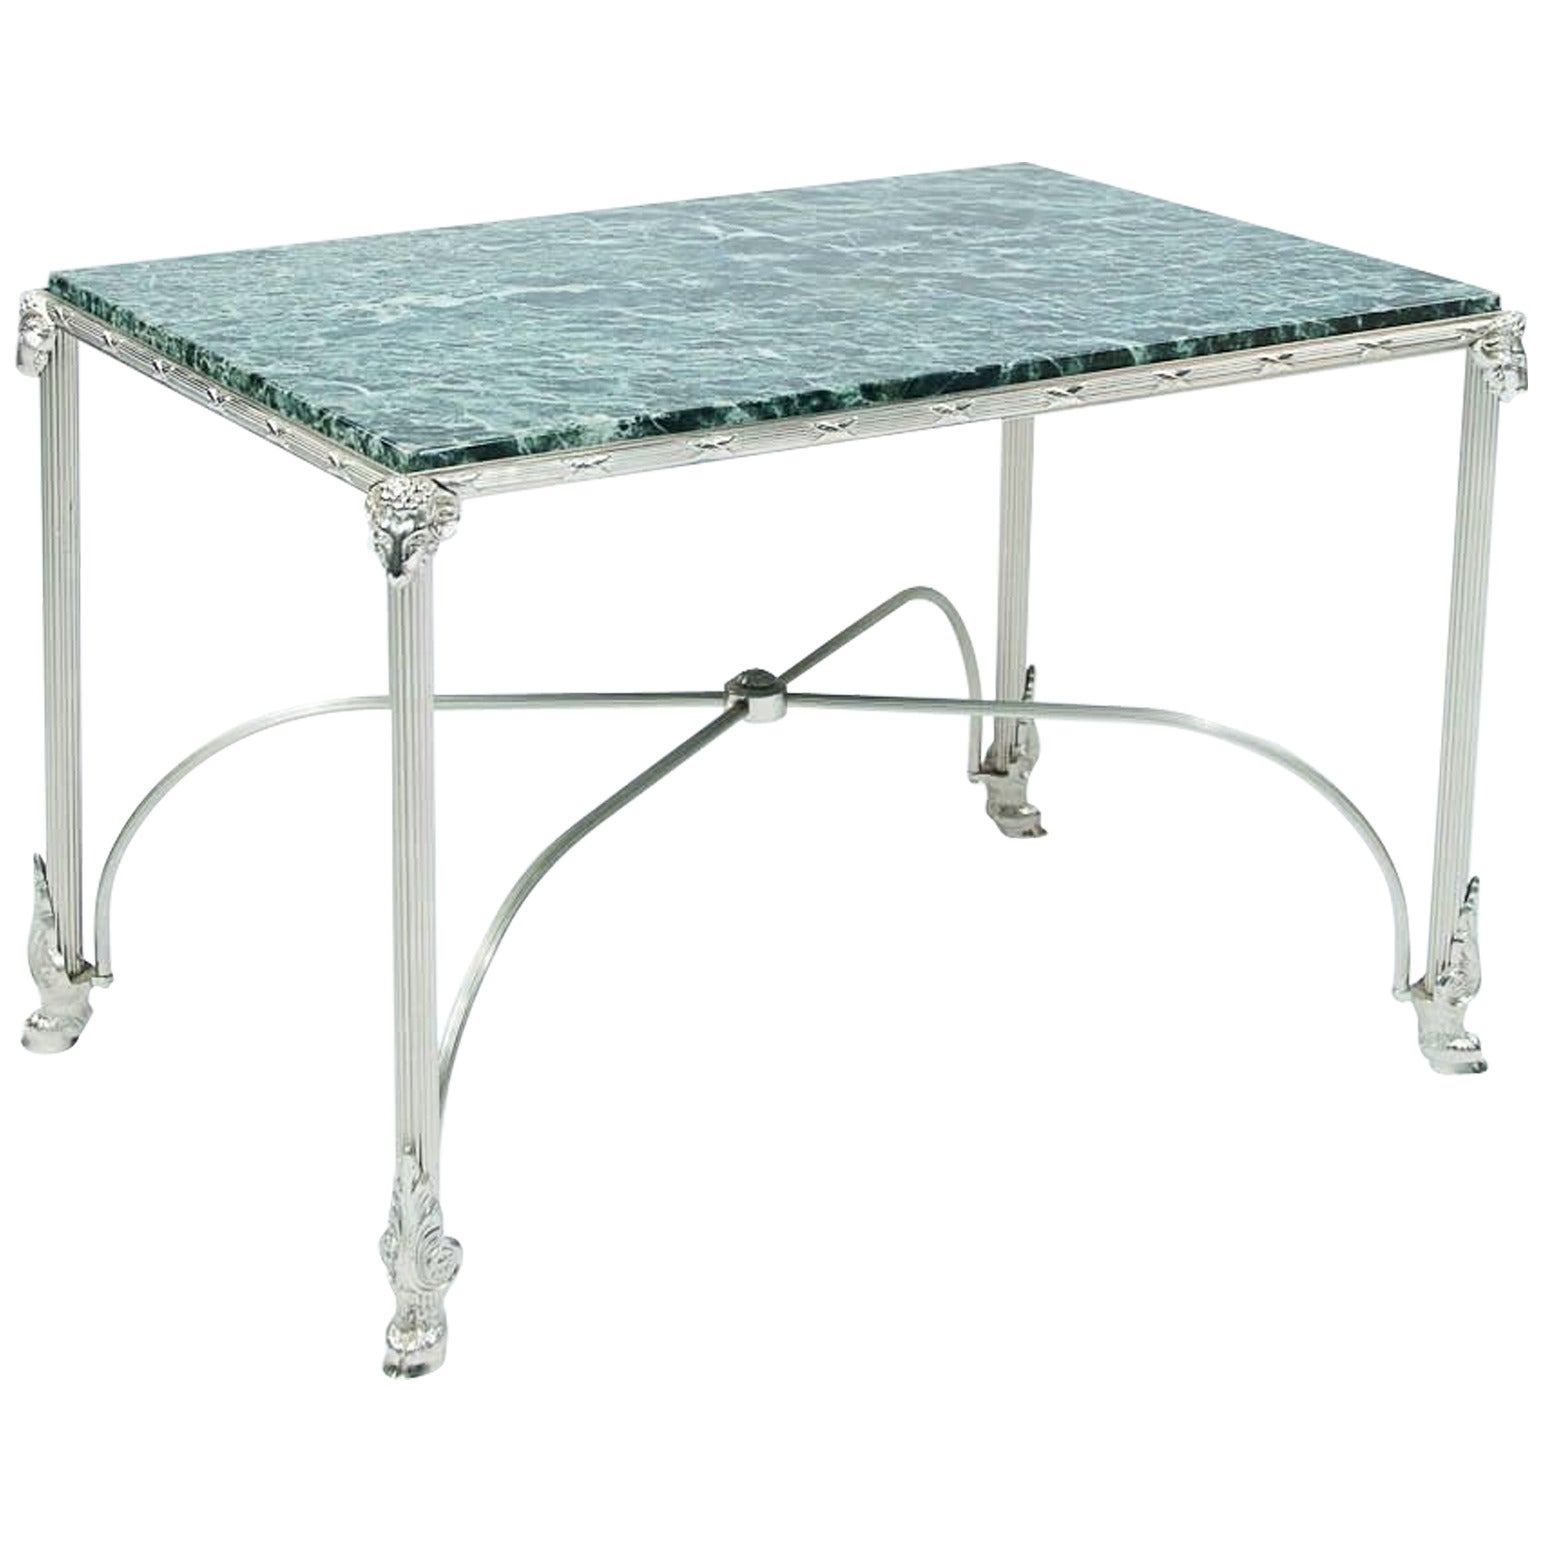 1920s Nickel-Plated Marble-Topped Occasional Table